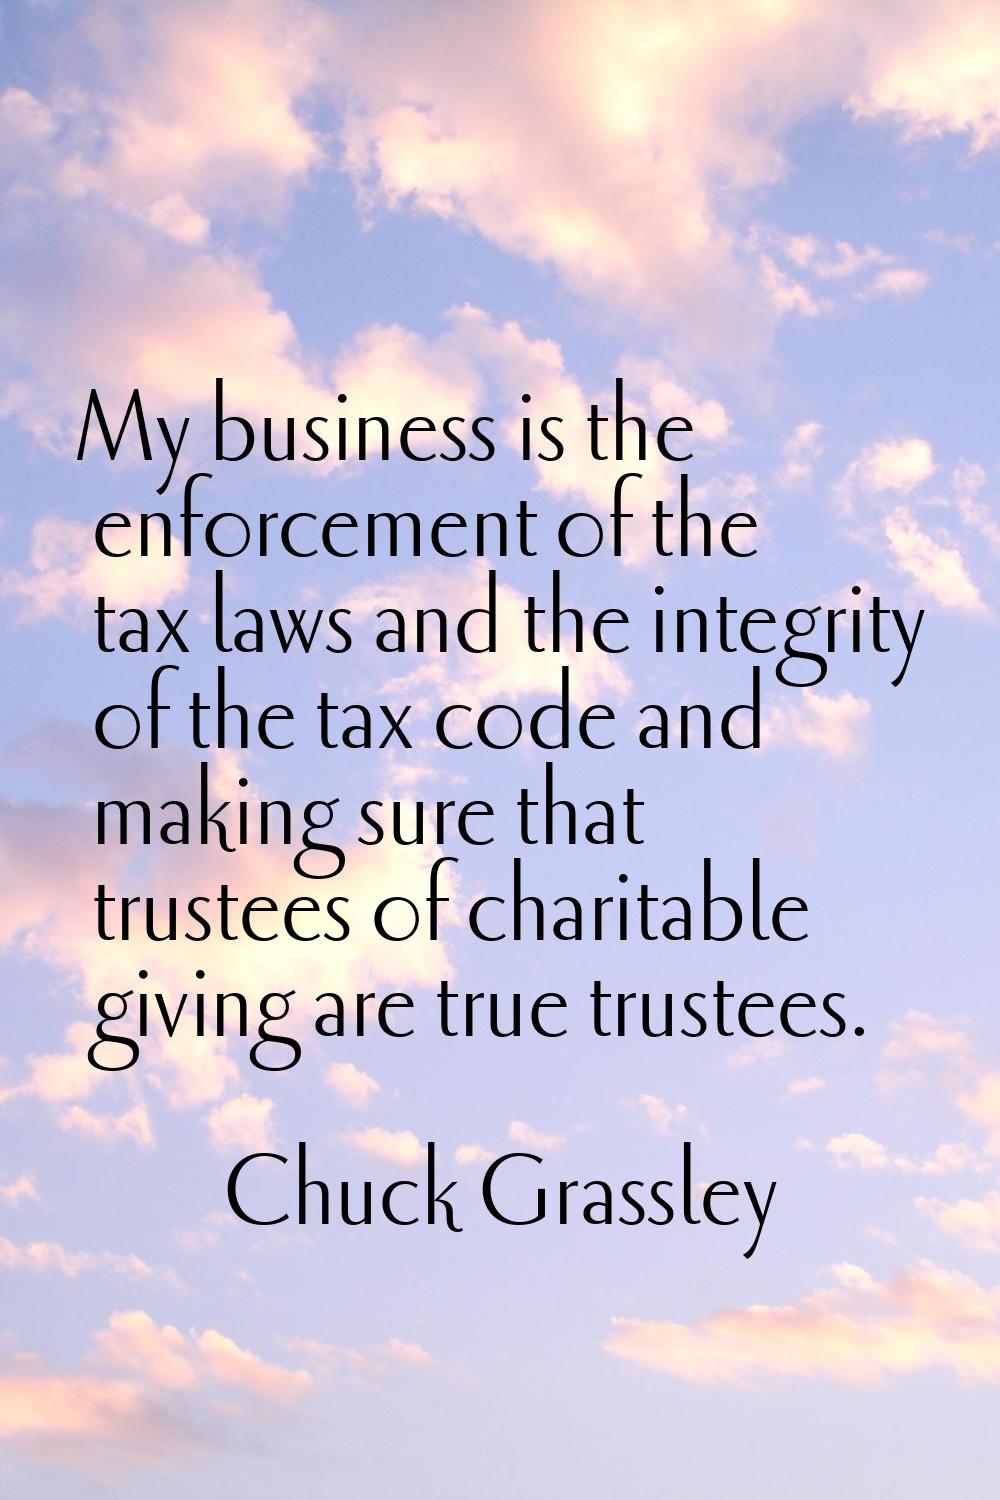 My business is the enforcement of the tax laws and the integrity of the tax code and making sure th